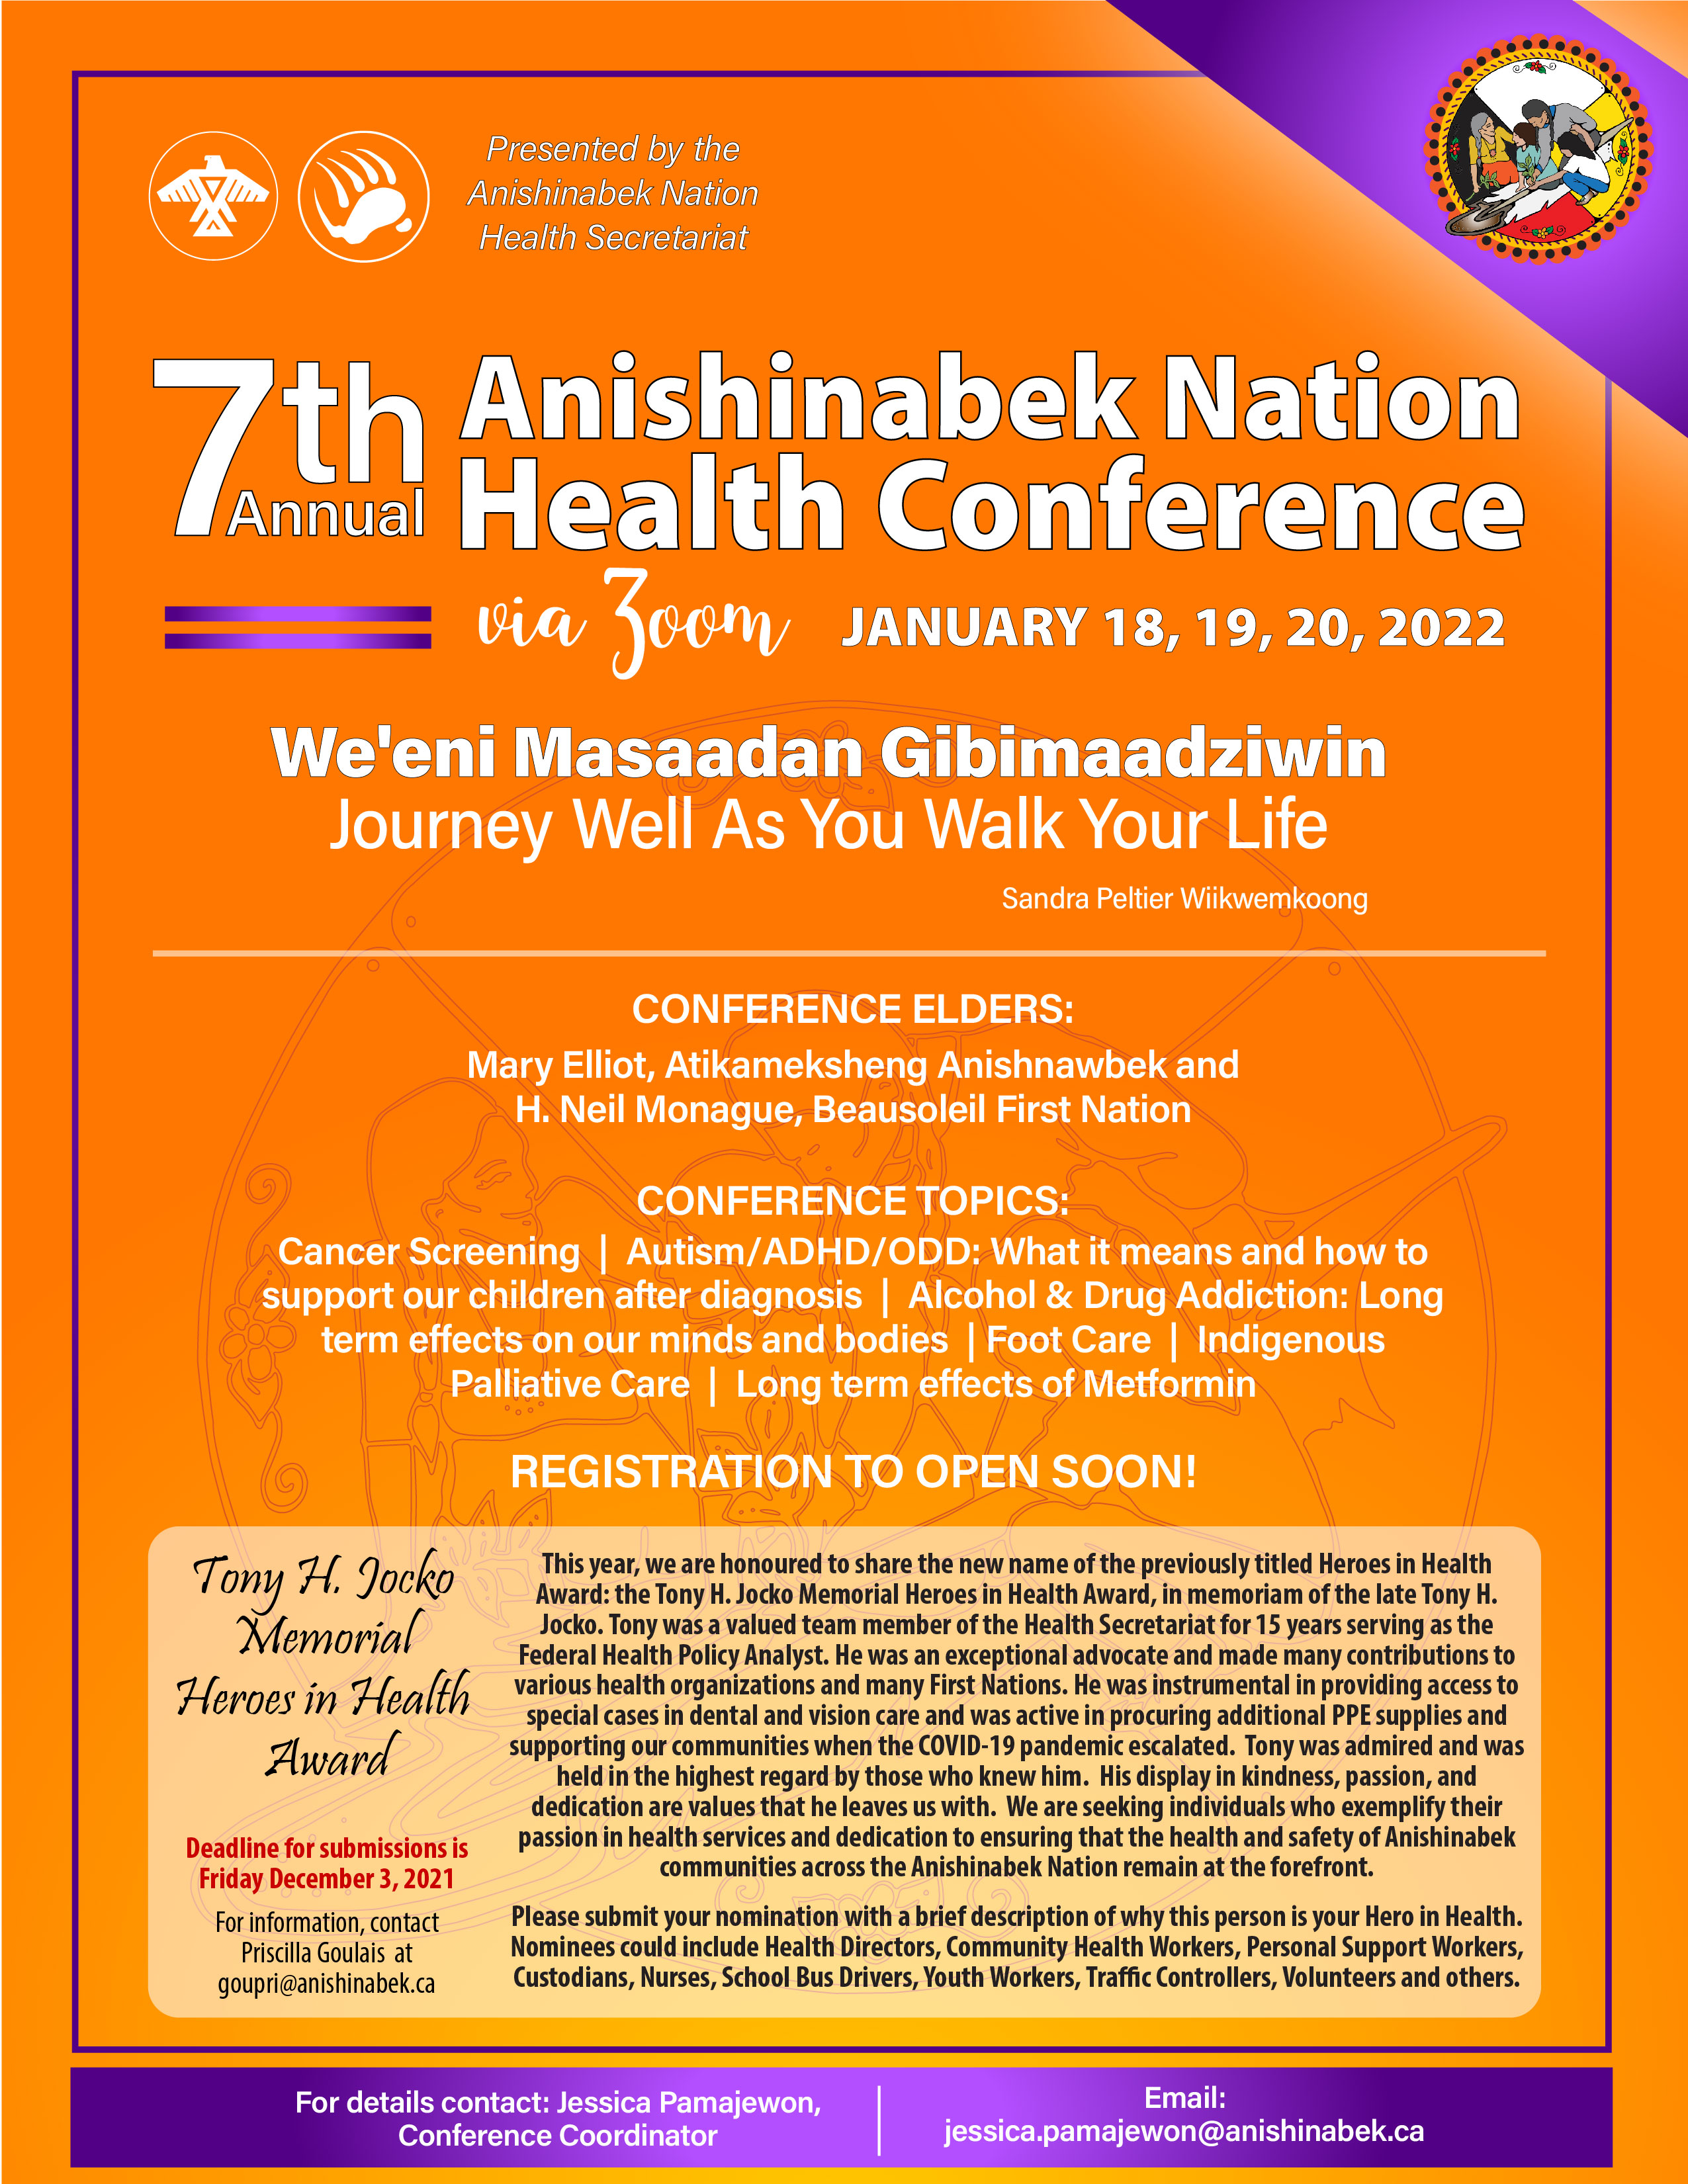 7th Annual Anishinabek Nation Health Conference